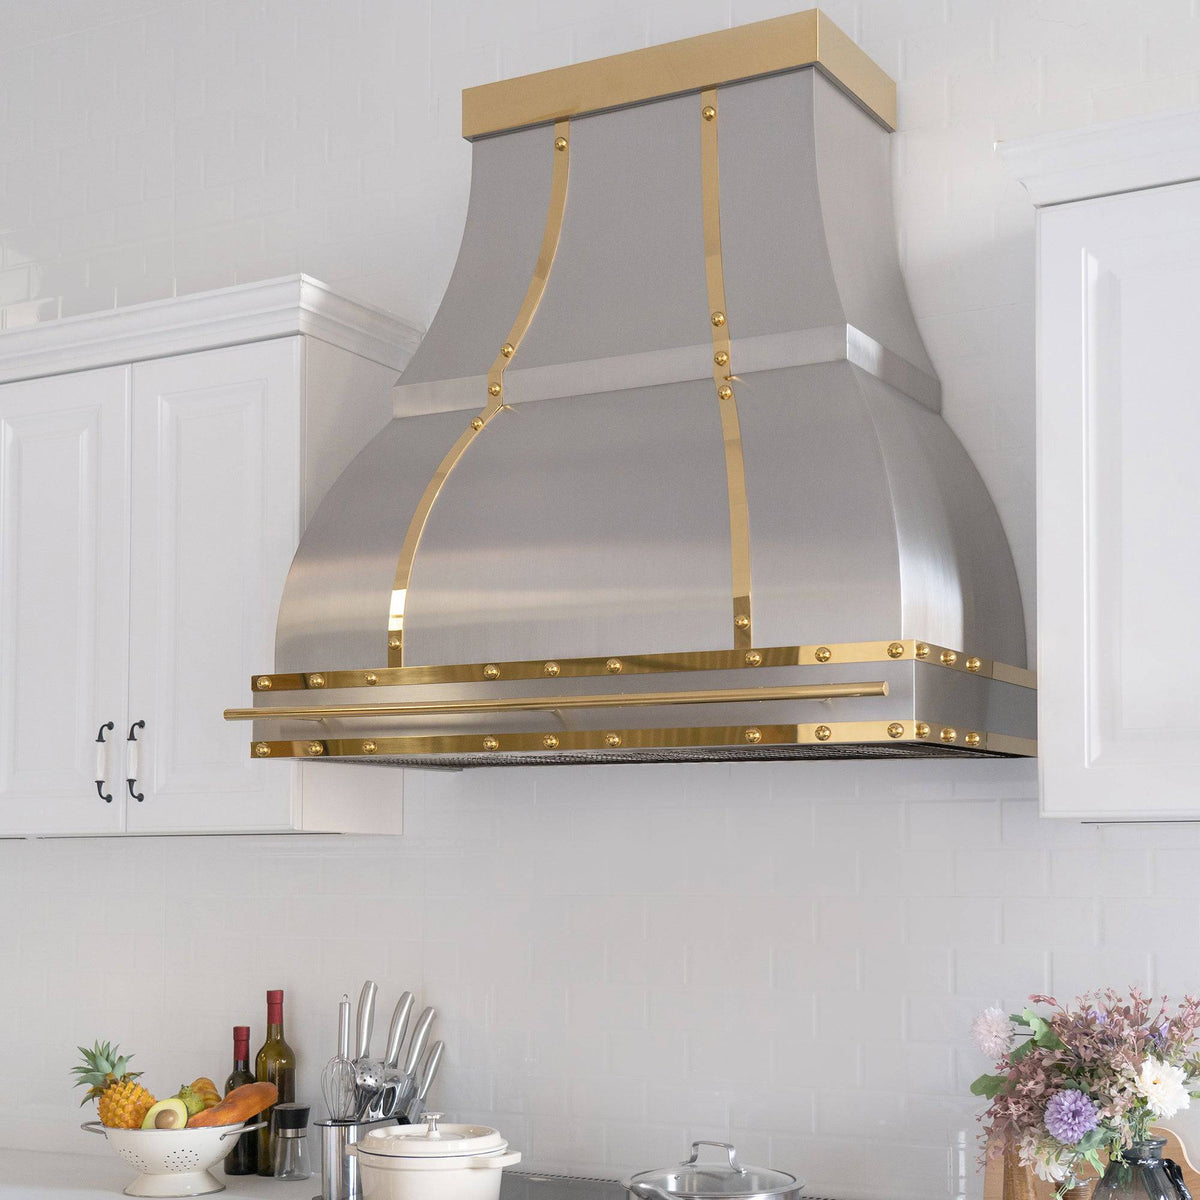 Fobest stainless steel range hood with brass accent